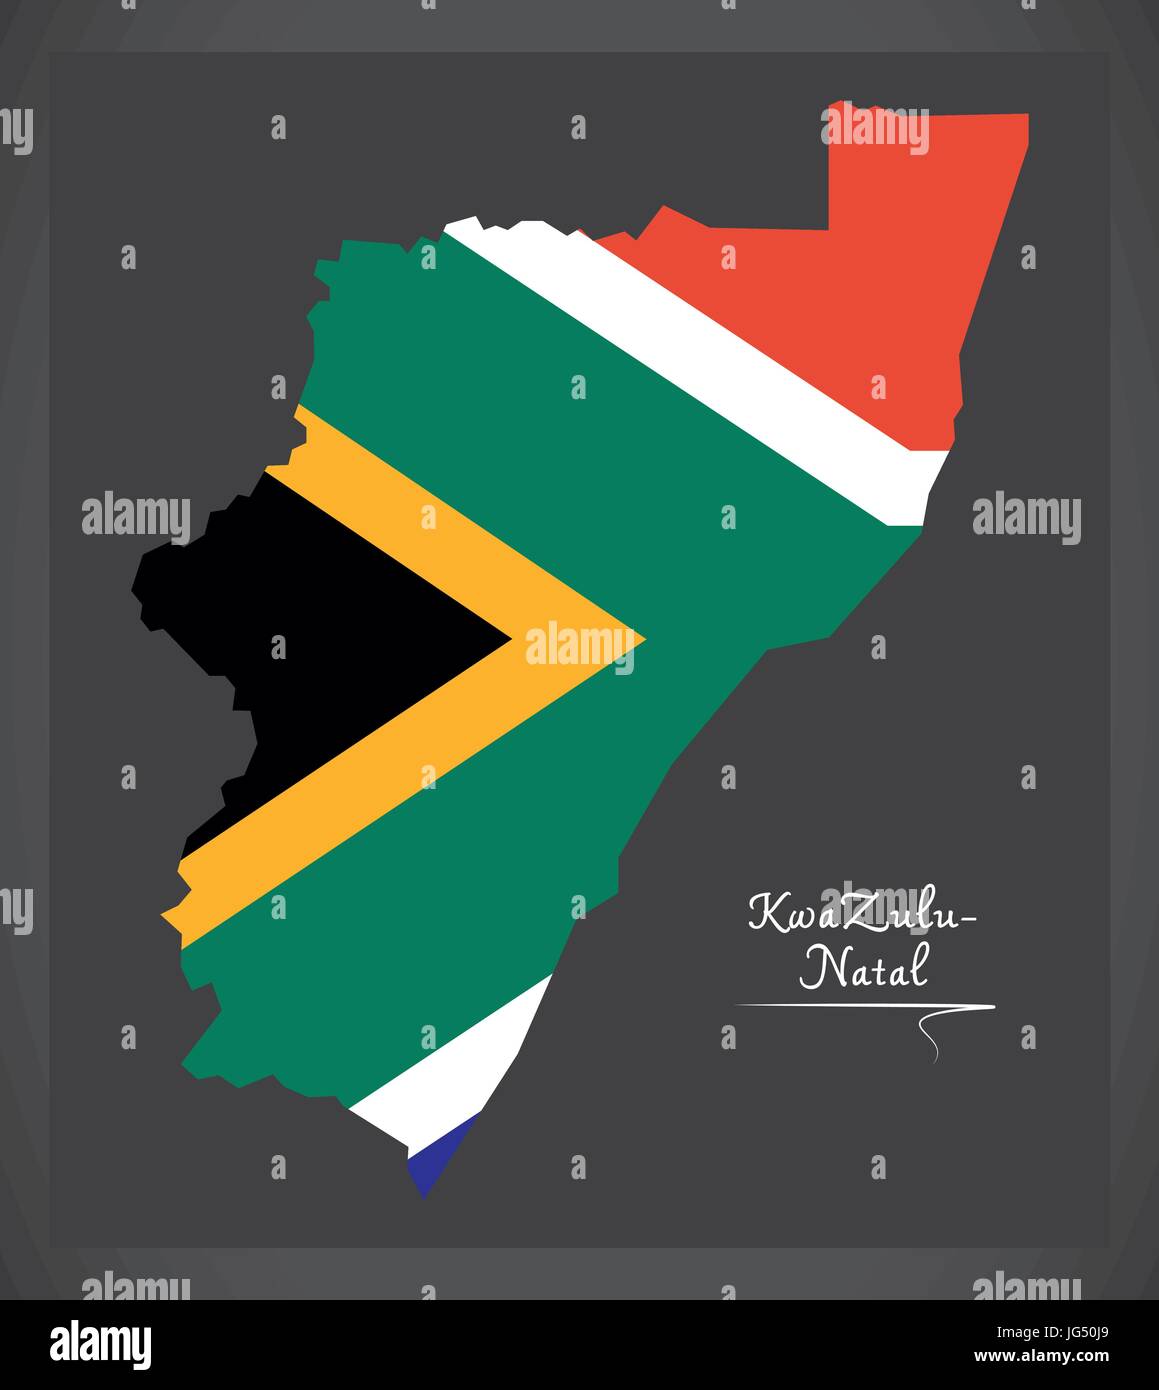 KwaZulu - Natal South Africa map with national flag illustration Stock Vector